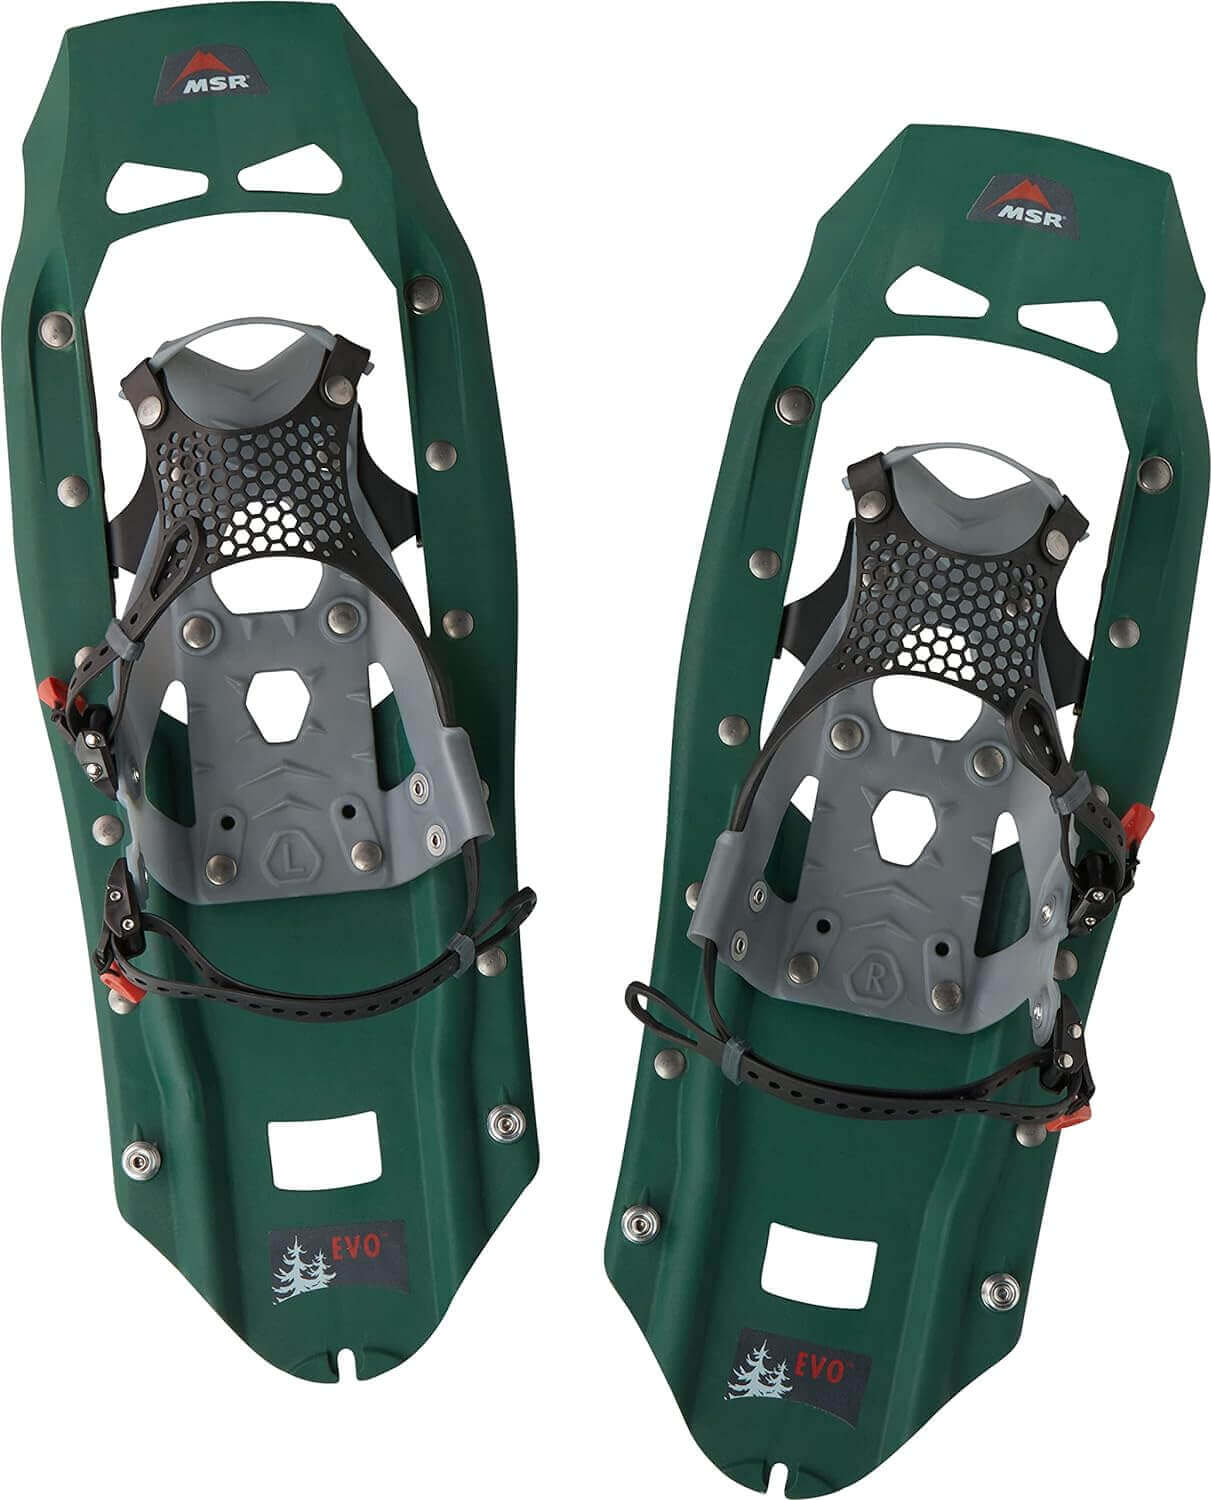 Shop The Latest >MSR Evo Trail Snowshoes - Made in the USA > *Only $229.43*> From The Top Brand > *MSRl* > Shop Now and Get Free Shipping On Orders Over $45.00 >*Shop Earth Foot*